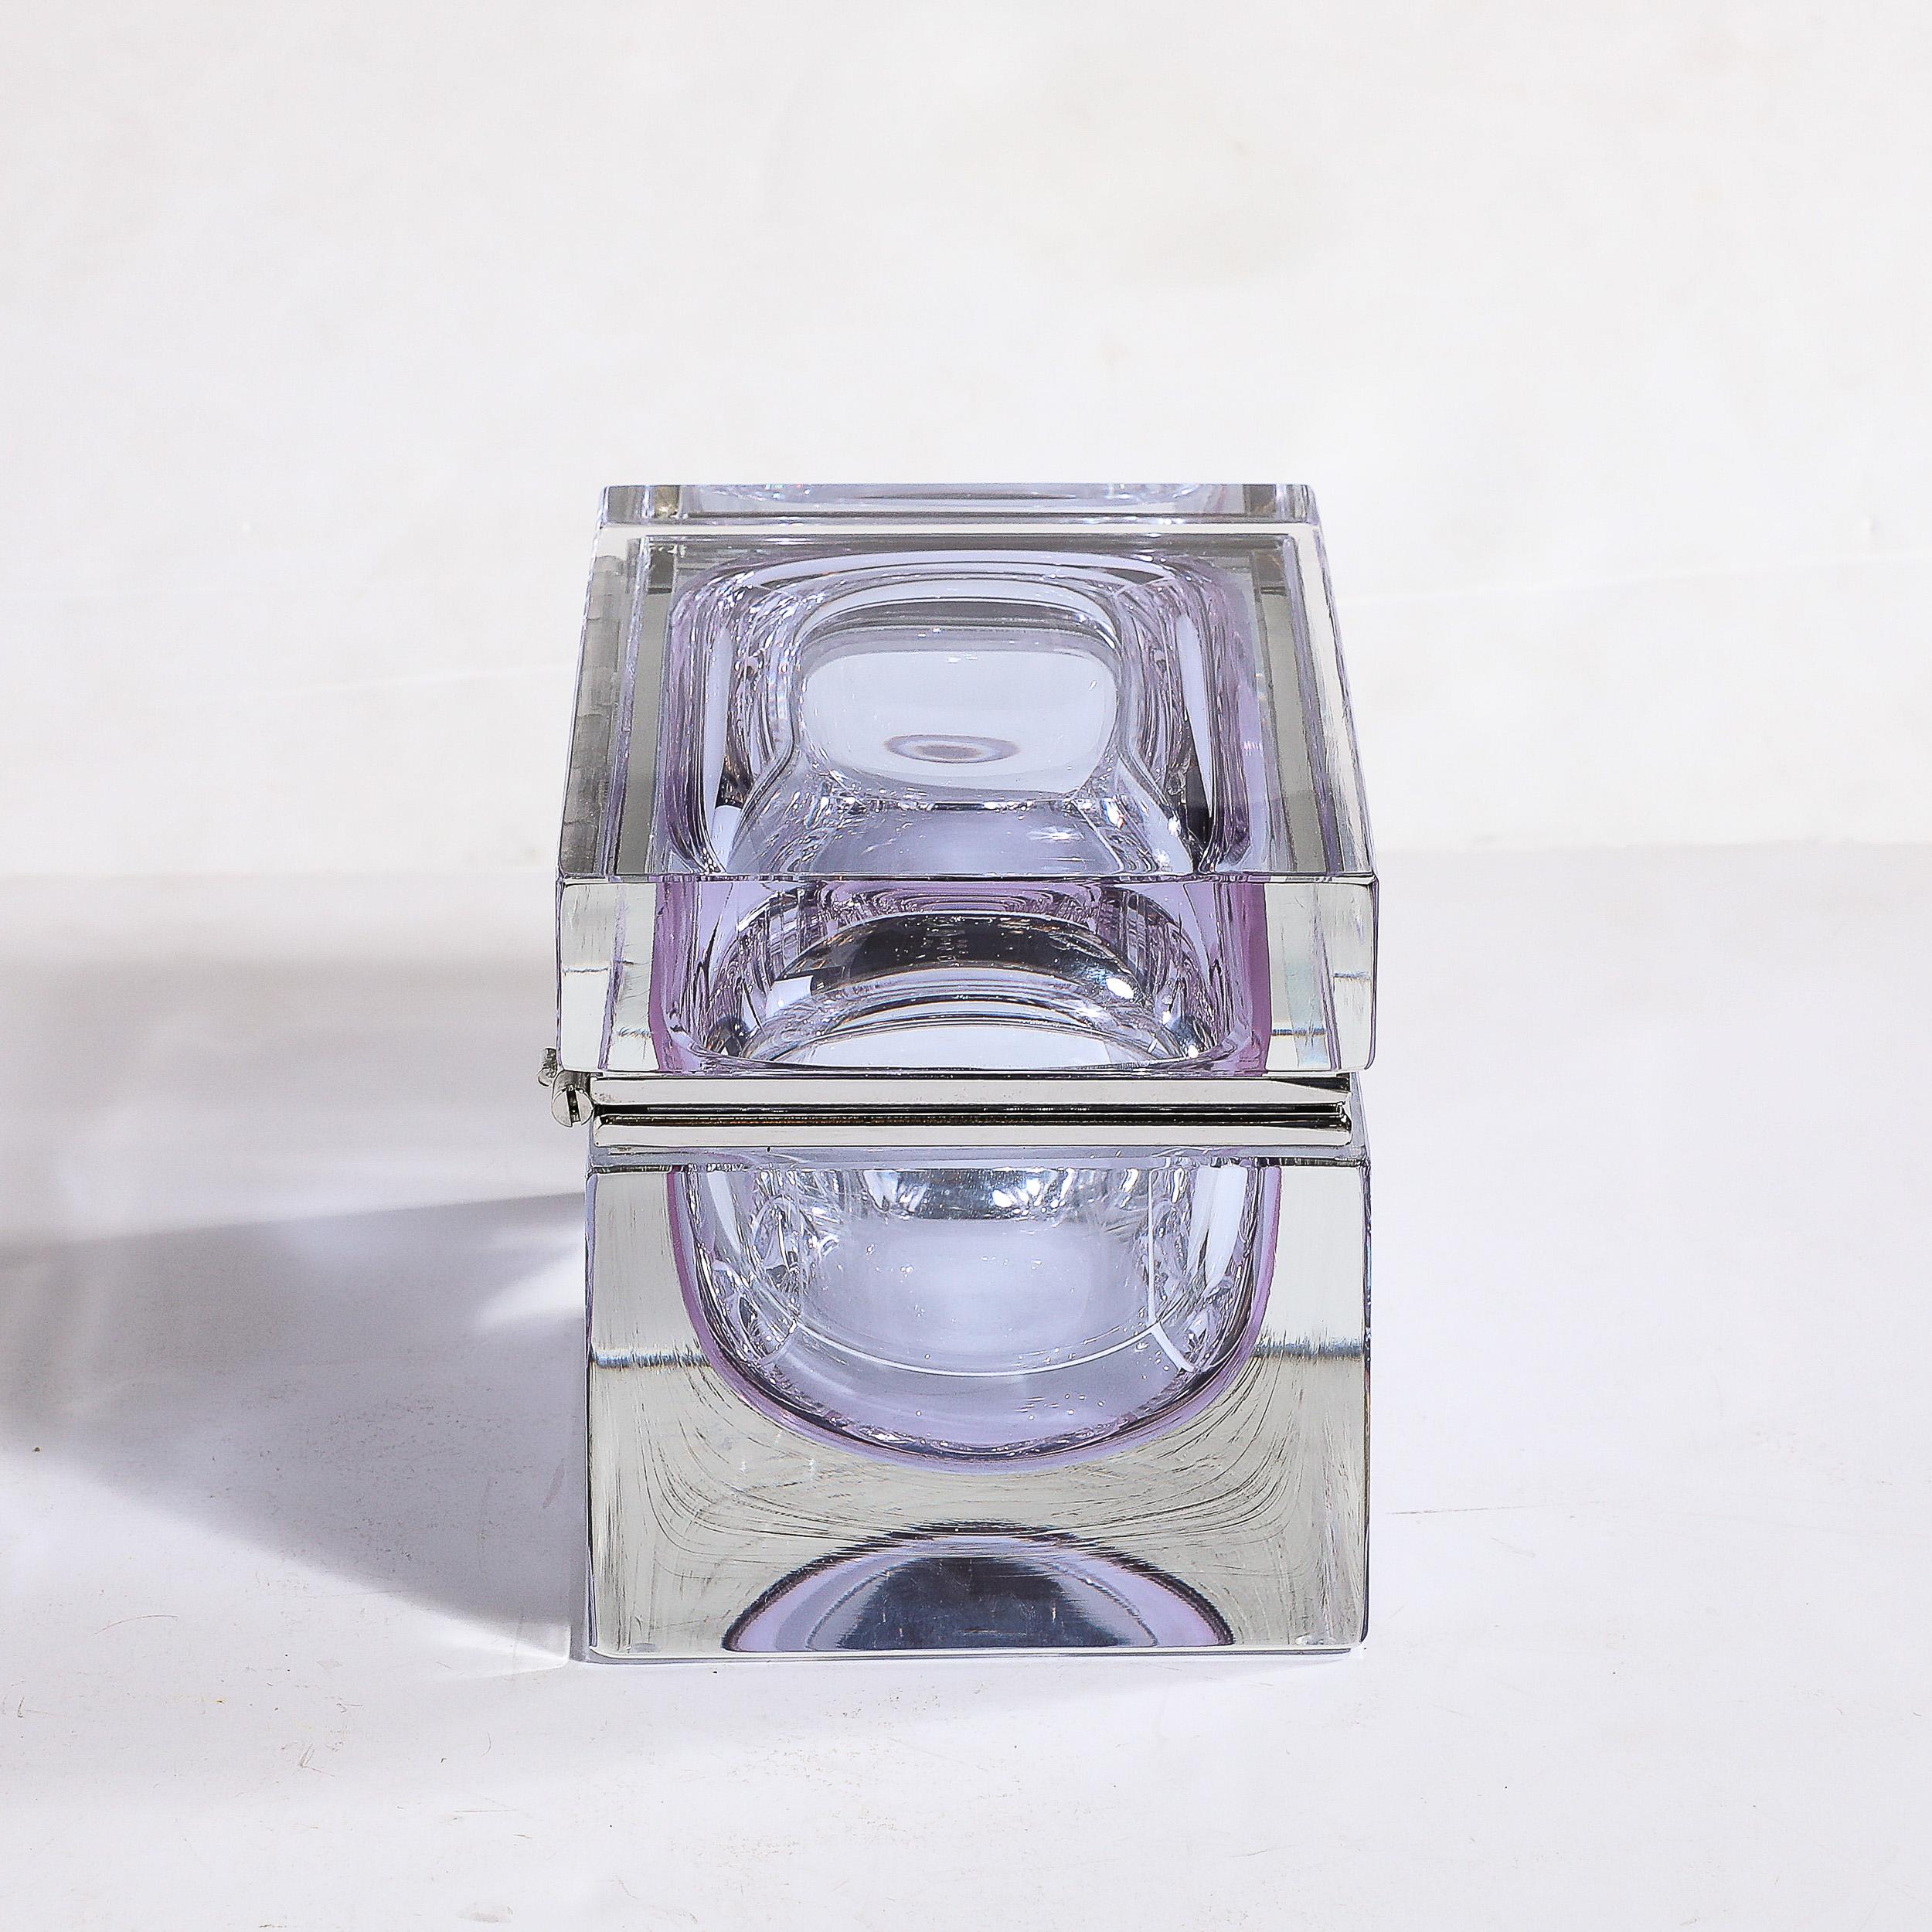 Contemporary Modernist Hand-Blown Murano Glass Box in Lavender with Nickel Fittings For Sale